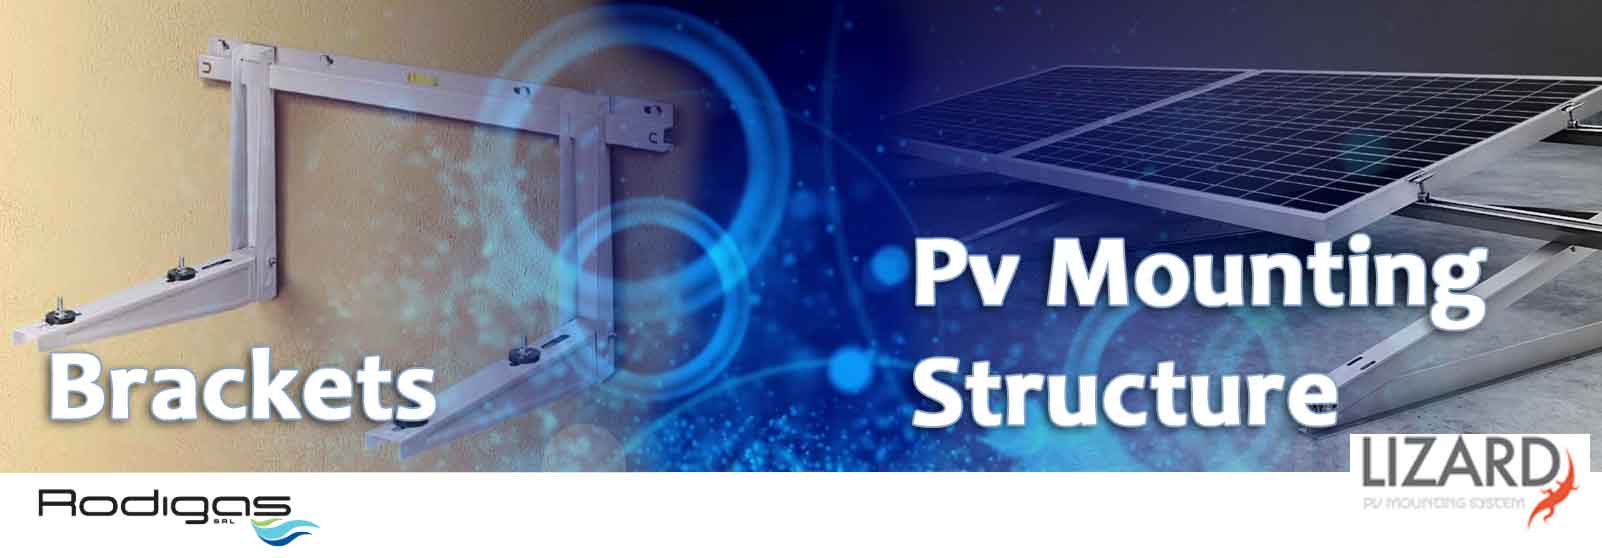 PV MOUNTING STRUCTURES - BRACKETS- SAFETY SYSTEM